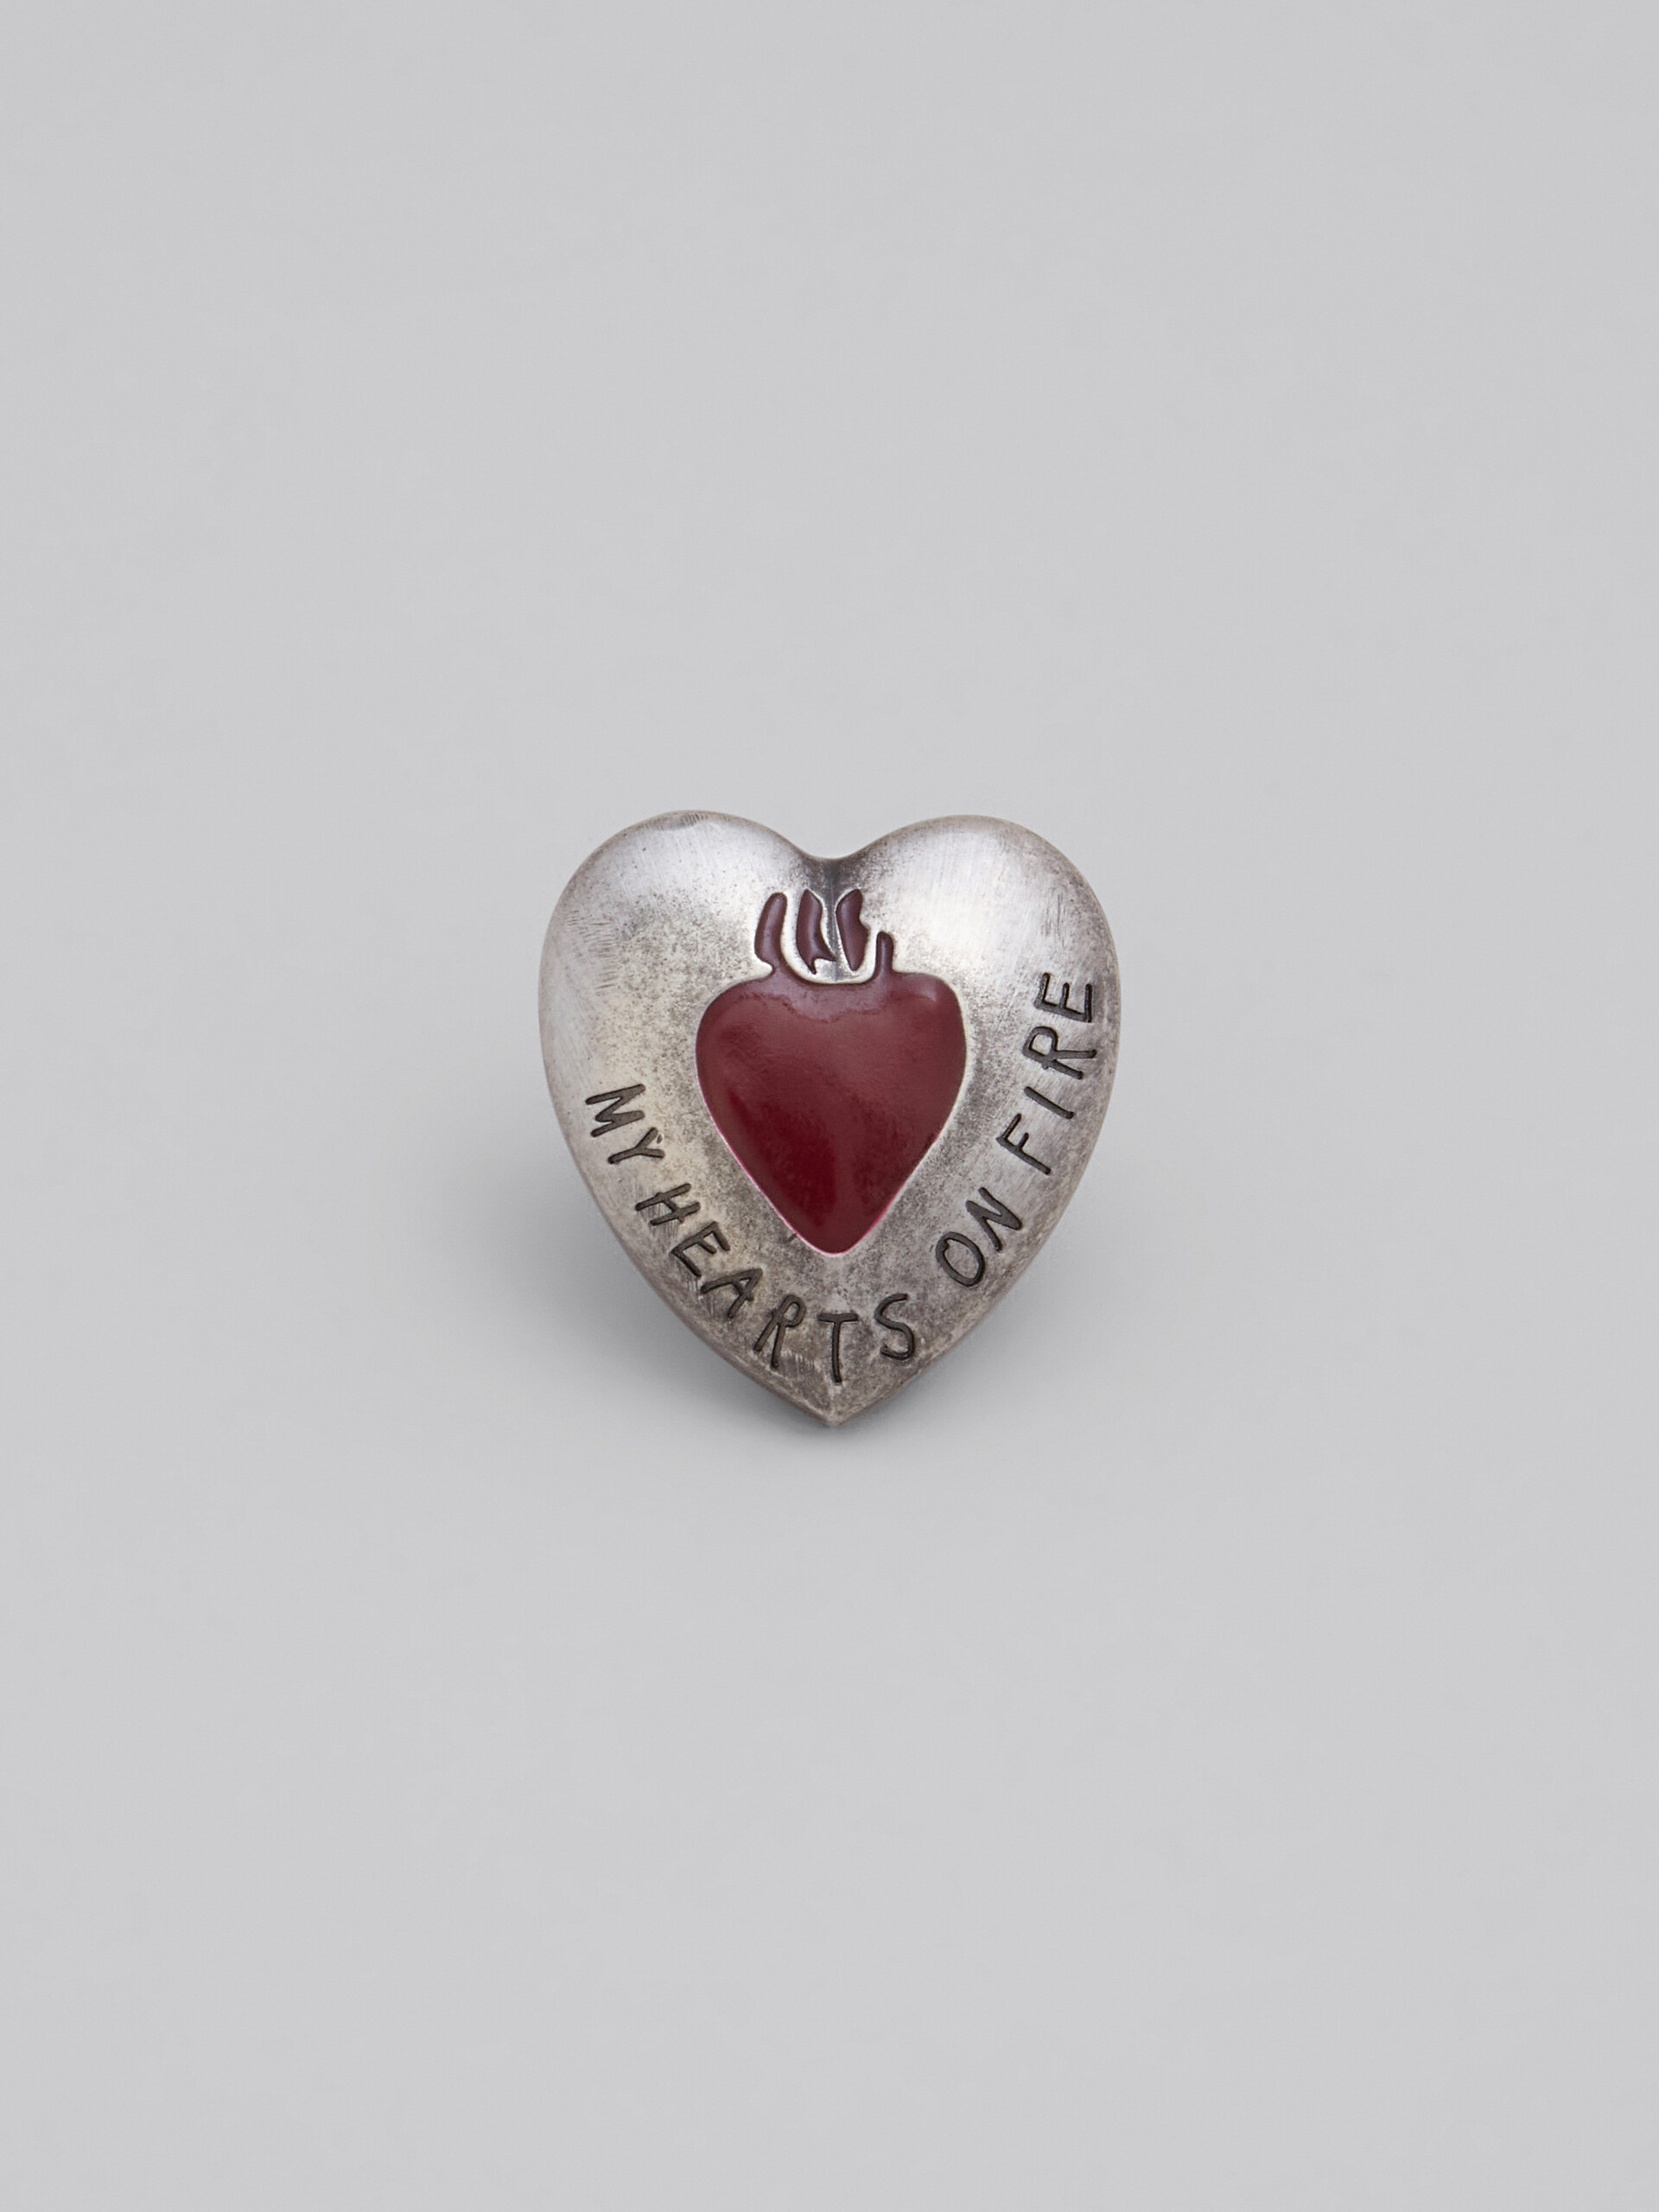 Ring Lucky Hearts aus Metall und Email - Ringe - Image 4